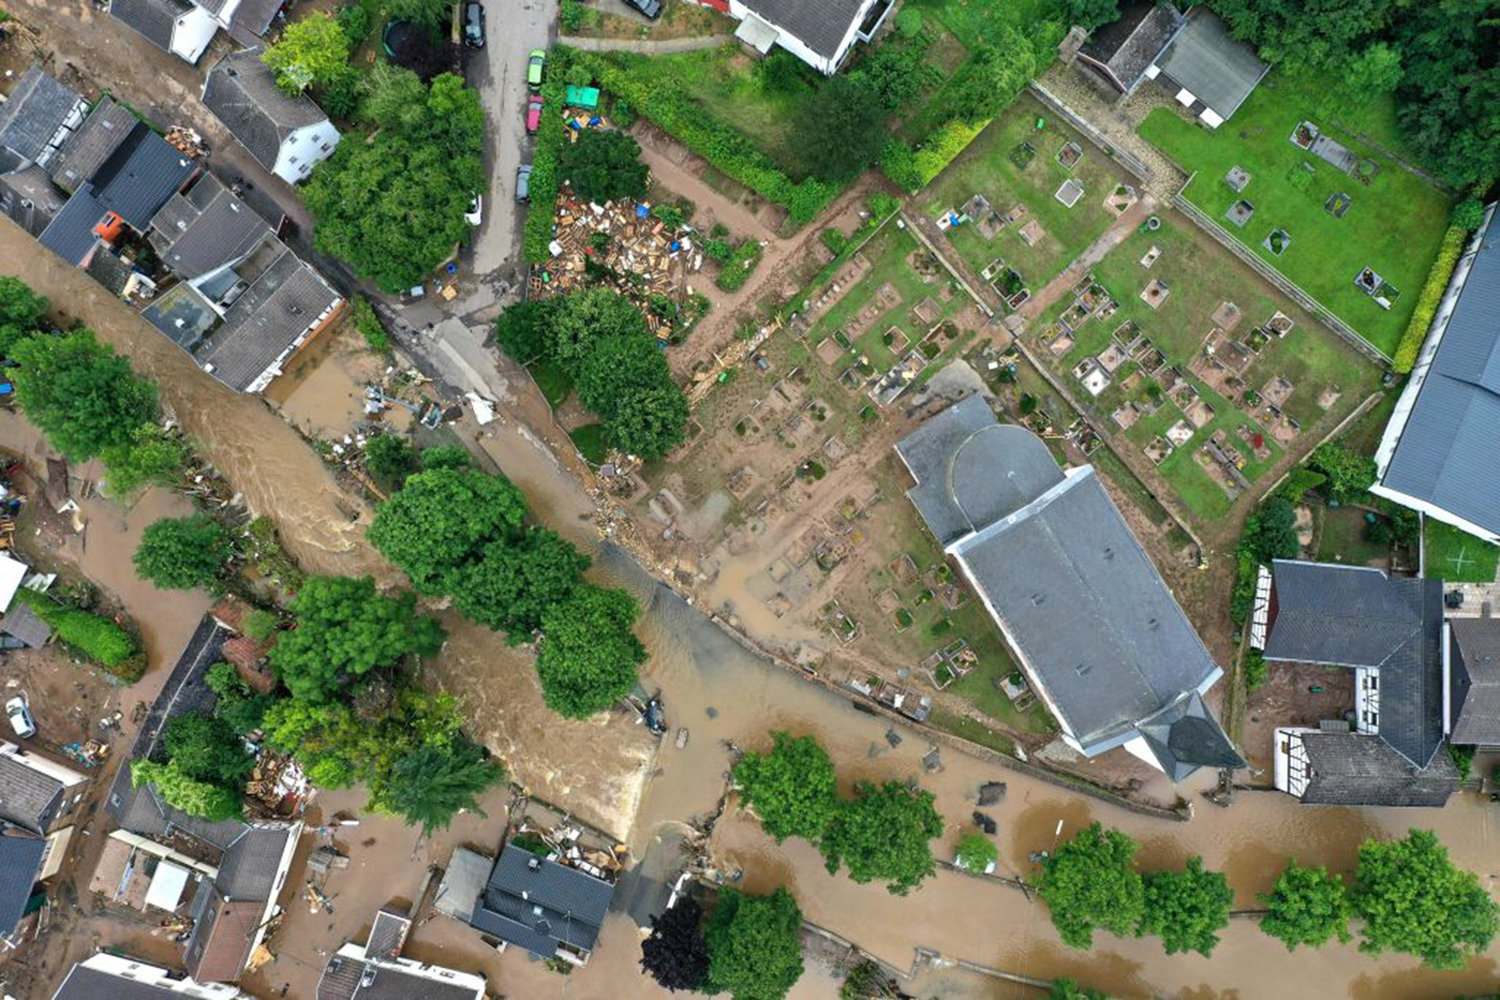 An aerial view taken on July 16, 2021 shows a flooded area with a church and a cemetery nerby in Iversheim near Bad Muenstereifel, western Germany, after heavy rain hit parts of the country, causing widespread flooding. - The death toll from devastating floods in Europe soared to at least 126 on July 16, most in western Germany where emergency responders were frantically searching for missing people.